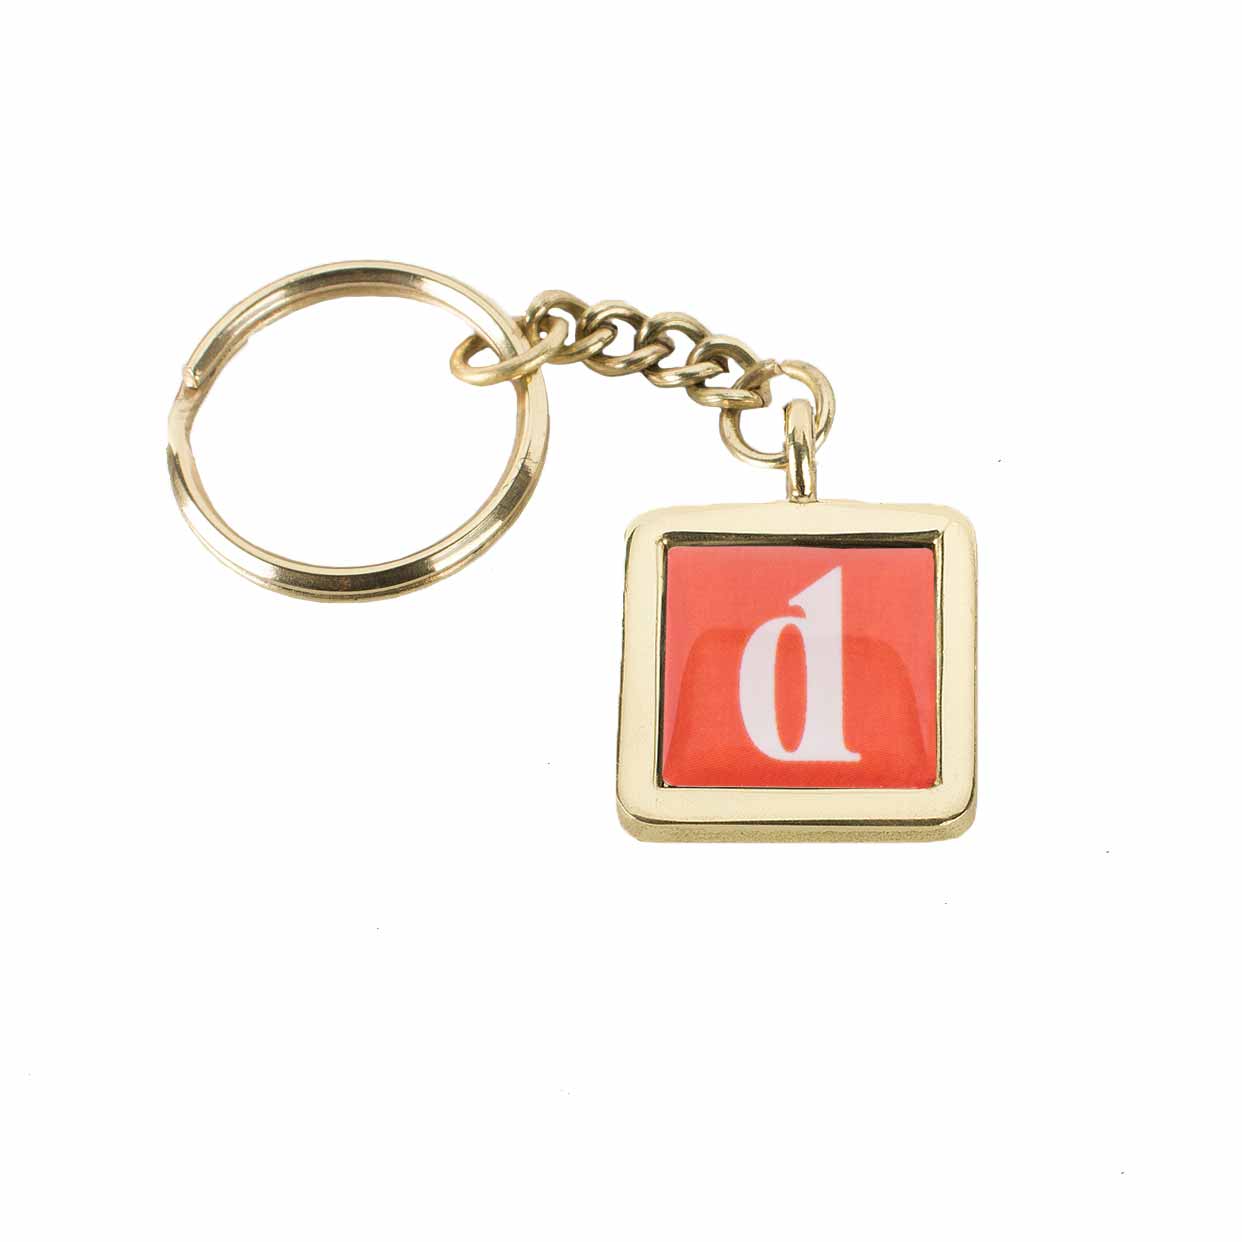 Best Day Ever Square Key Ring -  Initial